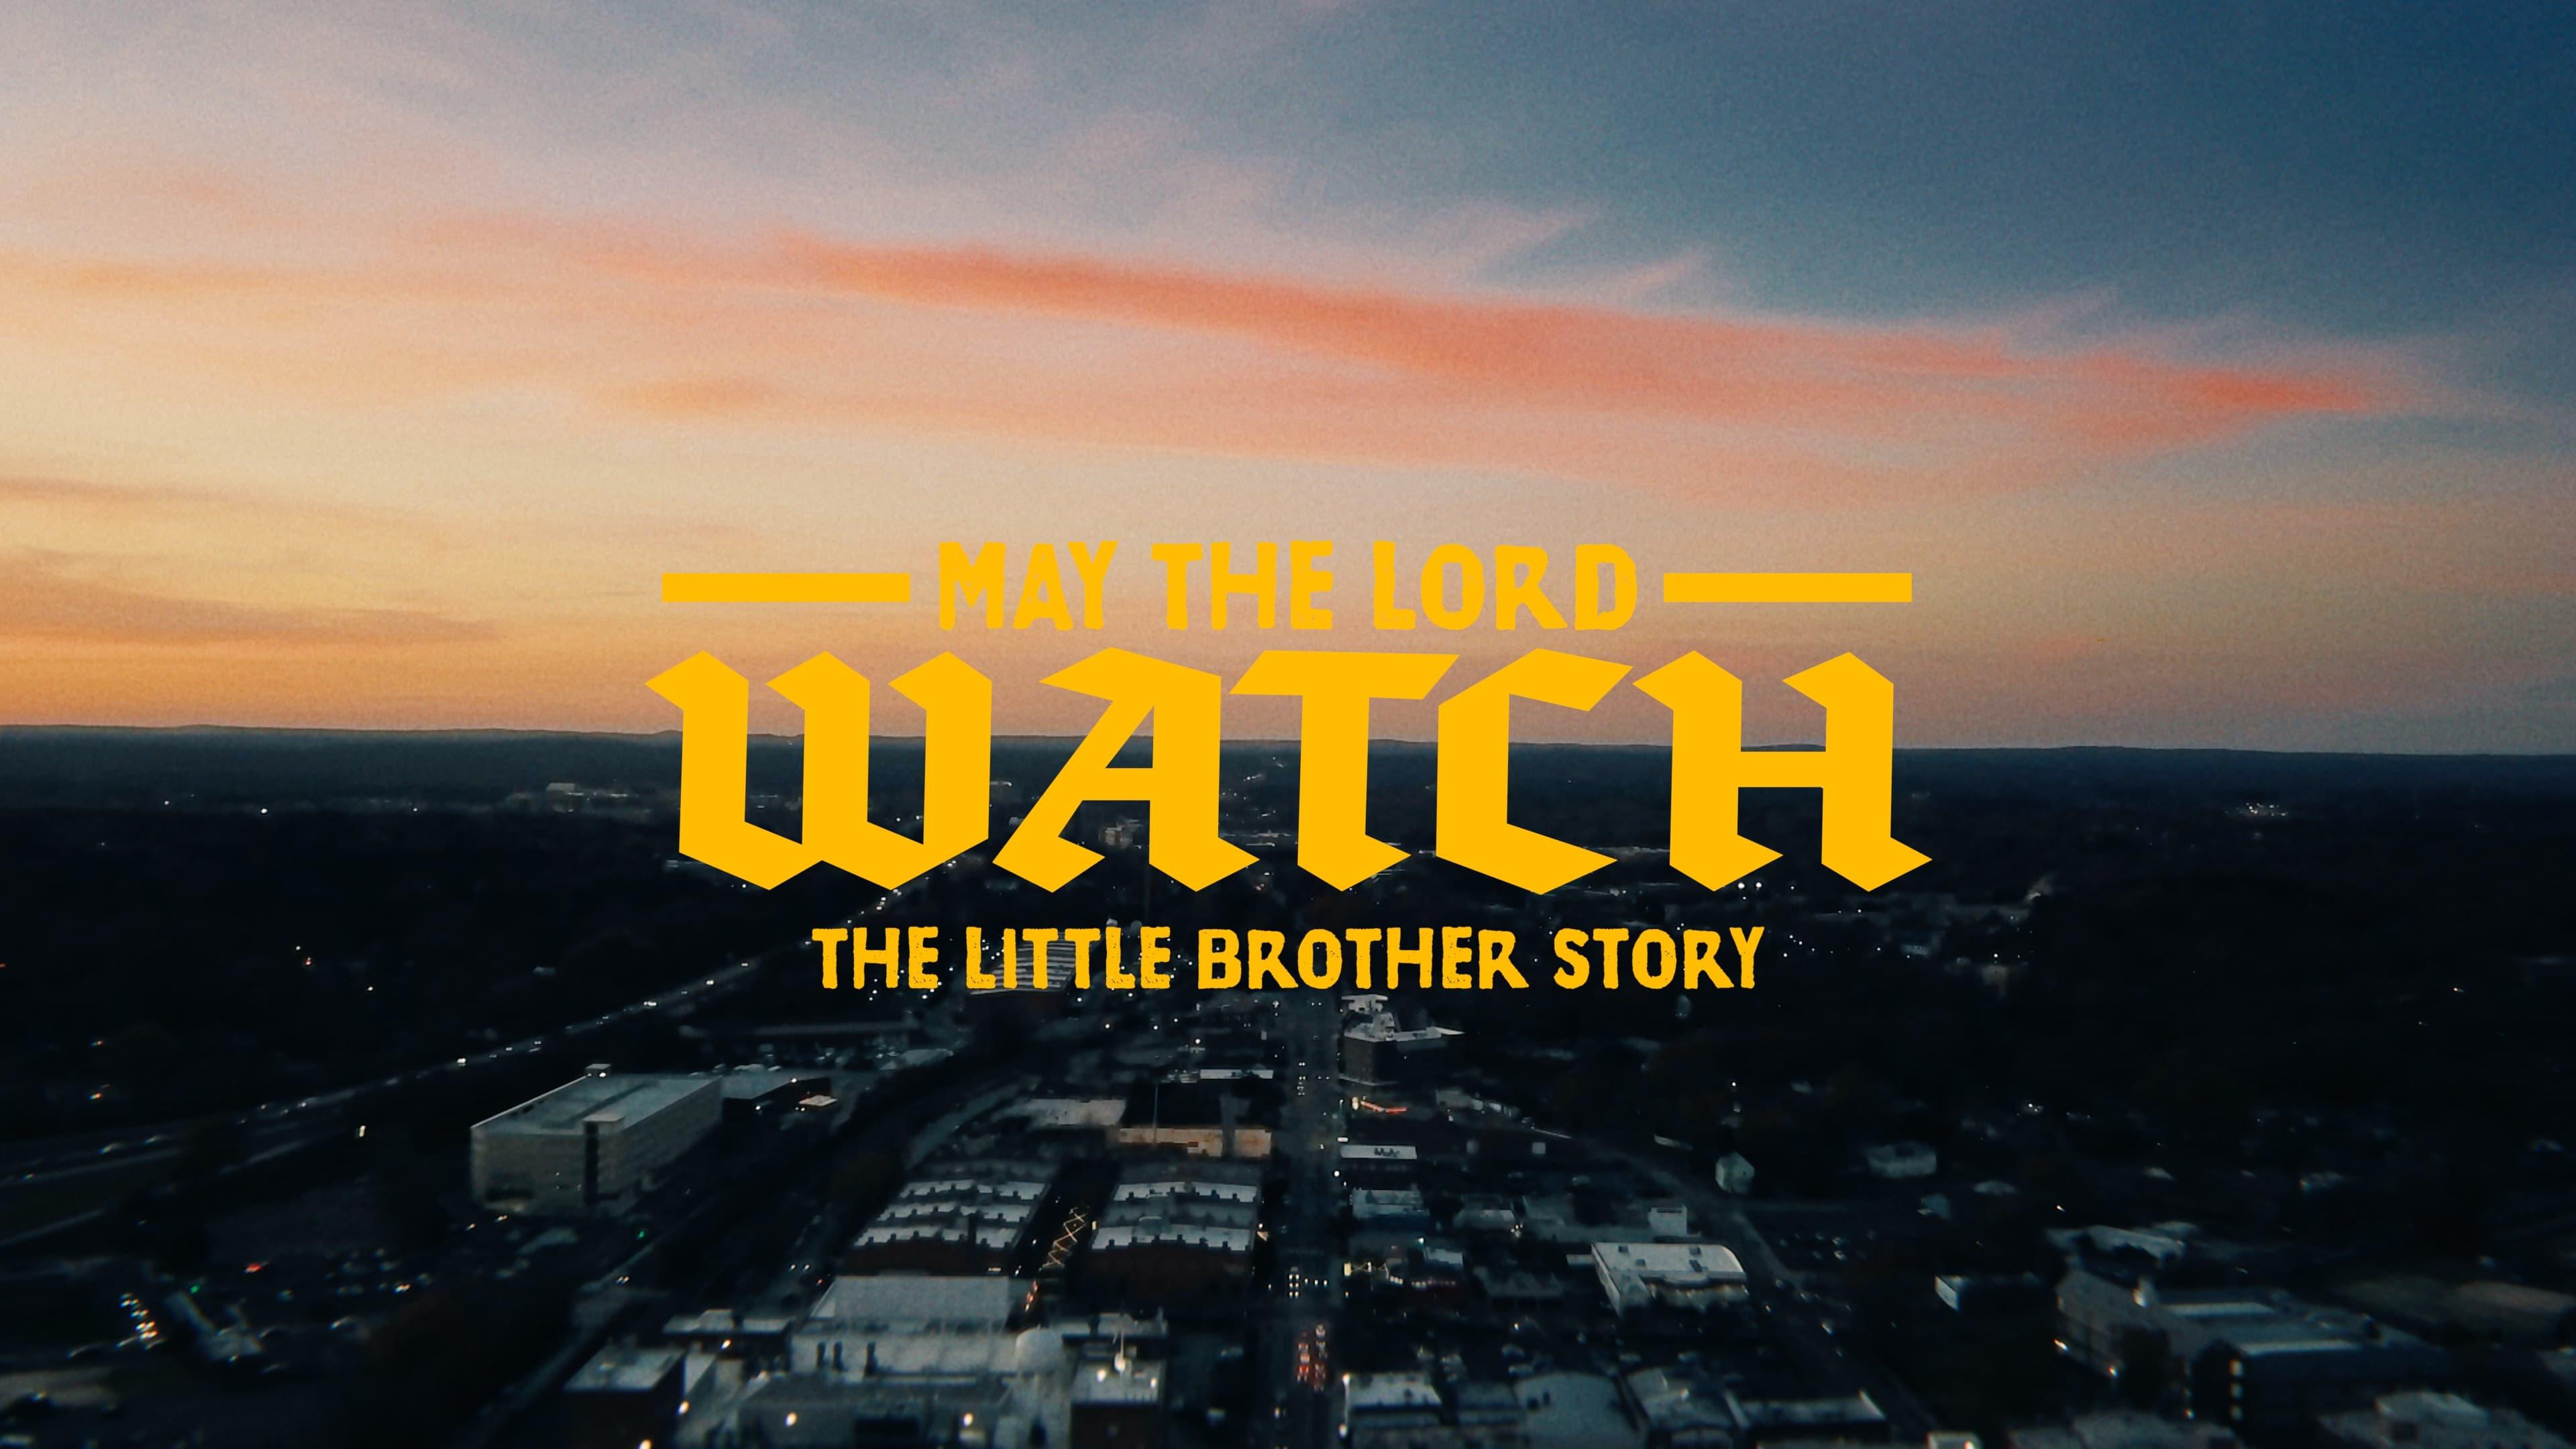 May The Lord Watch: The Little Brother Story backdrop